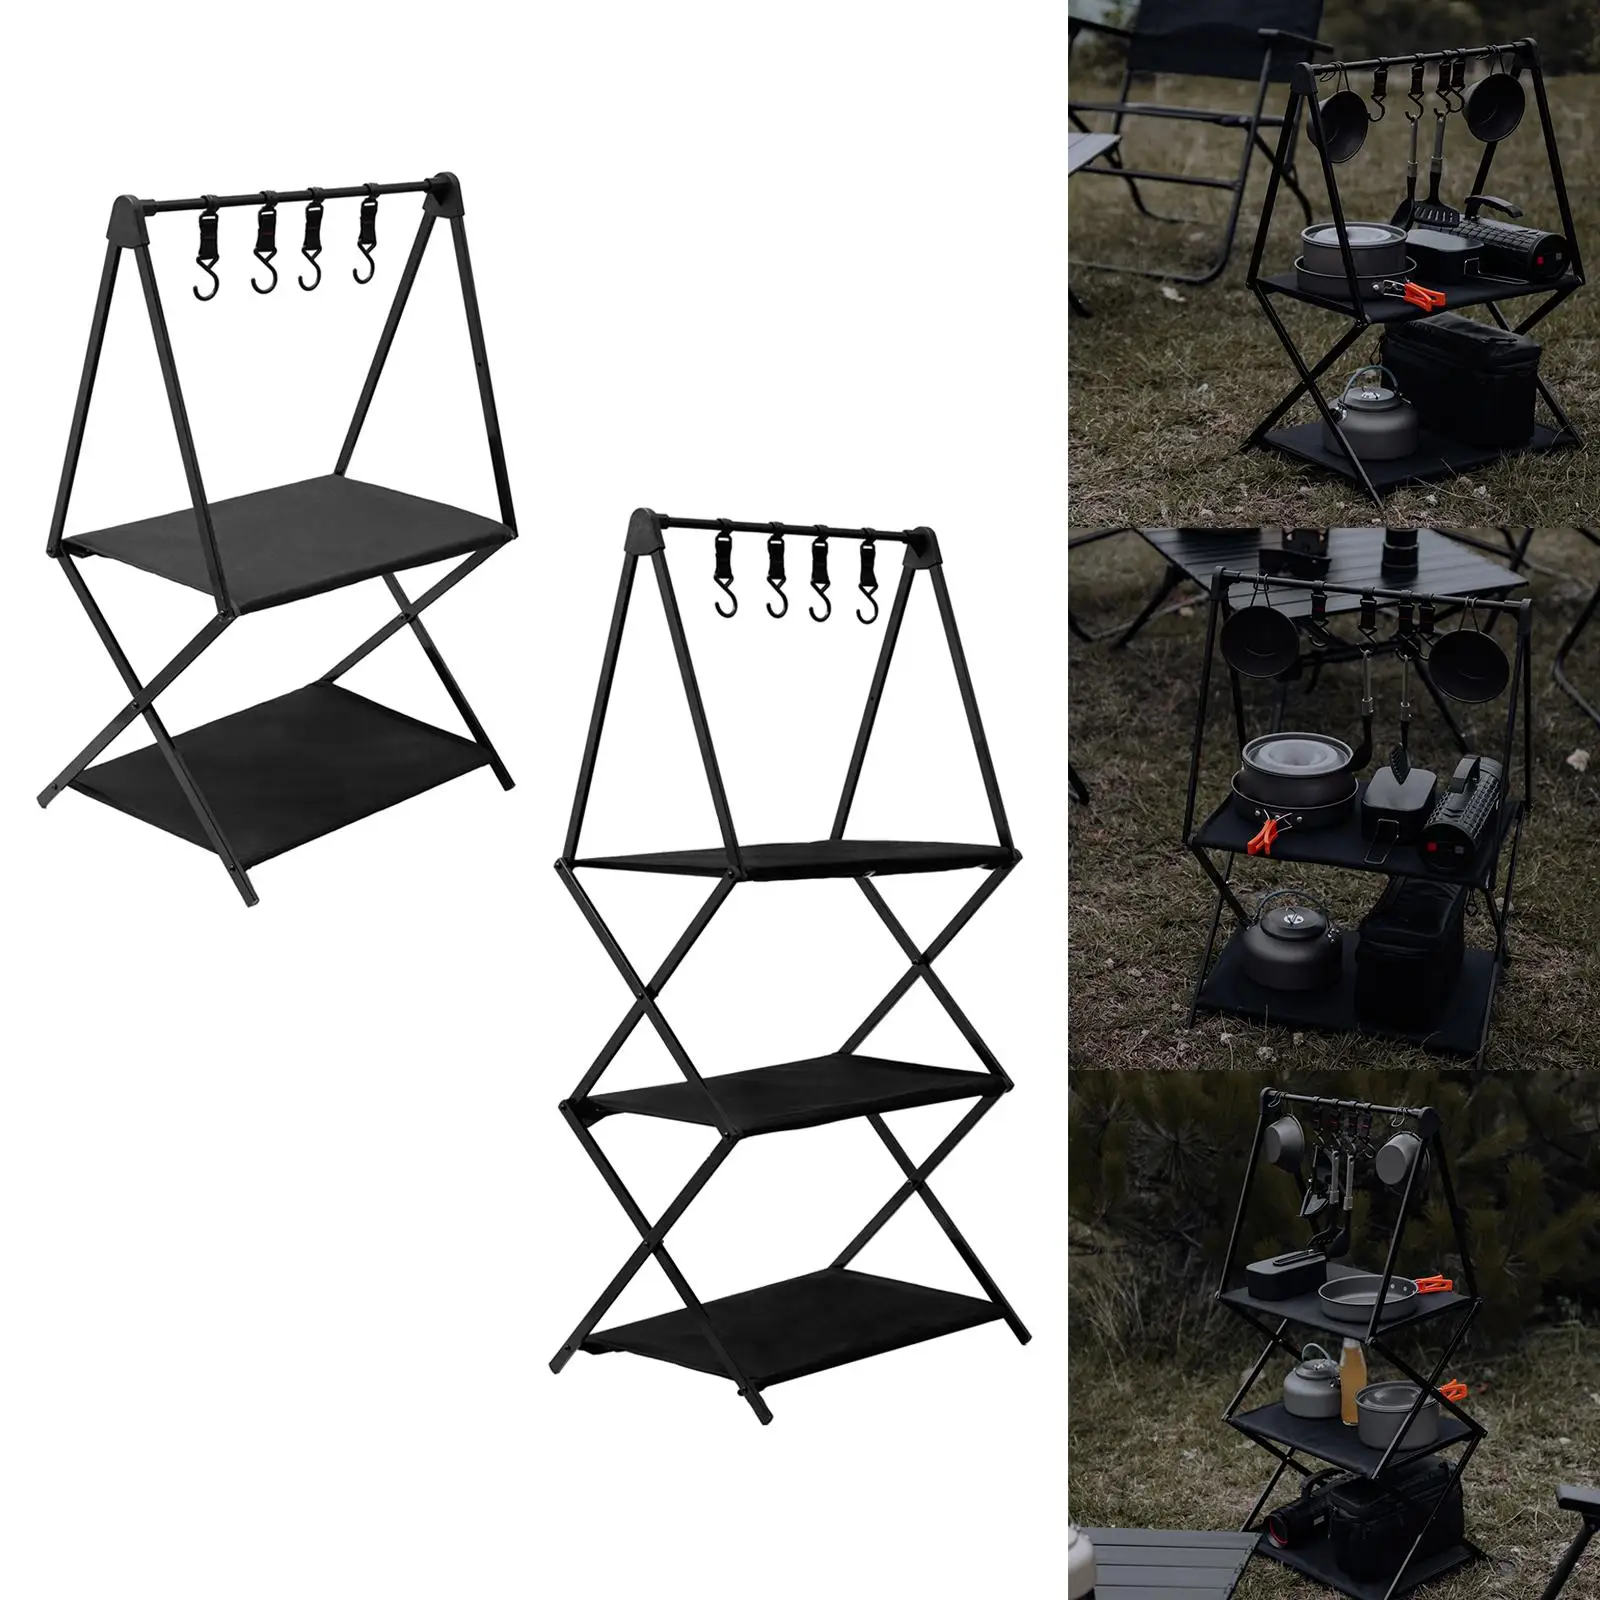 Camping Folding Storage Shelves with Hooks Shelving Units Metal Frame Portable for Camping Indoor Outdoor Household Black